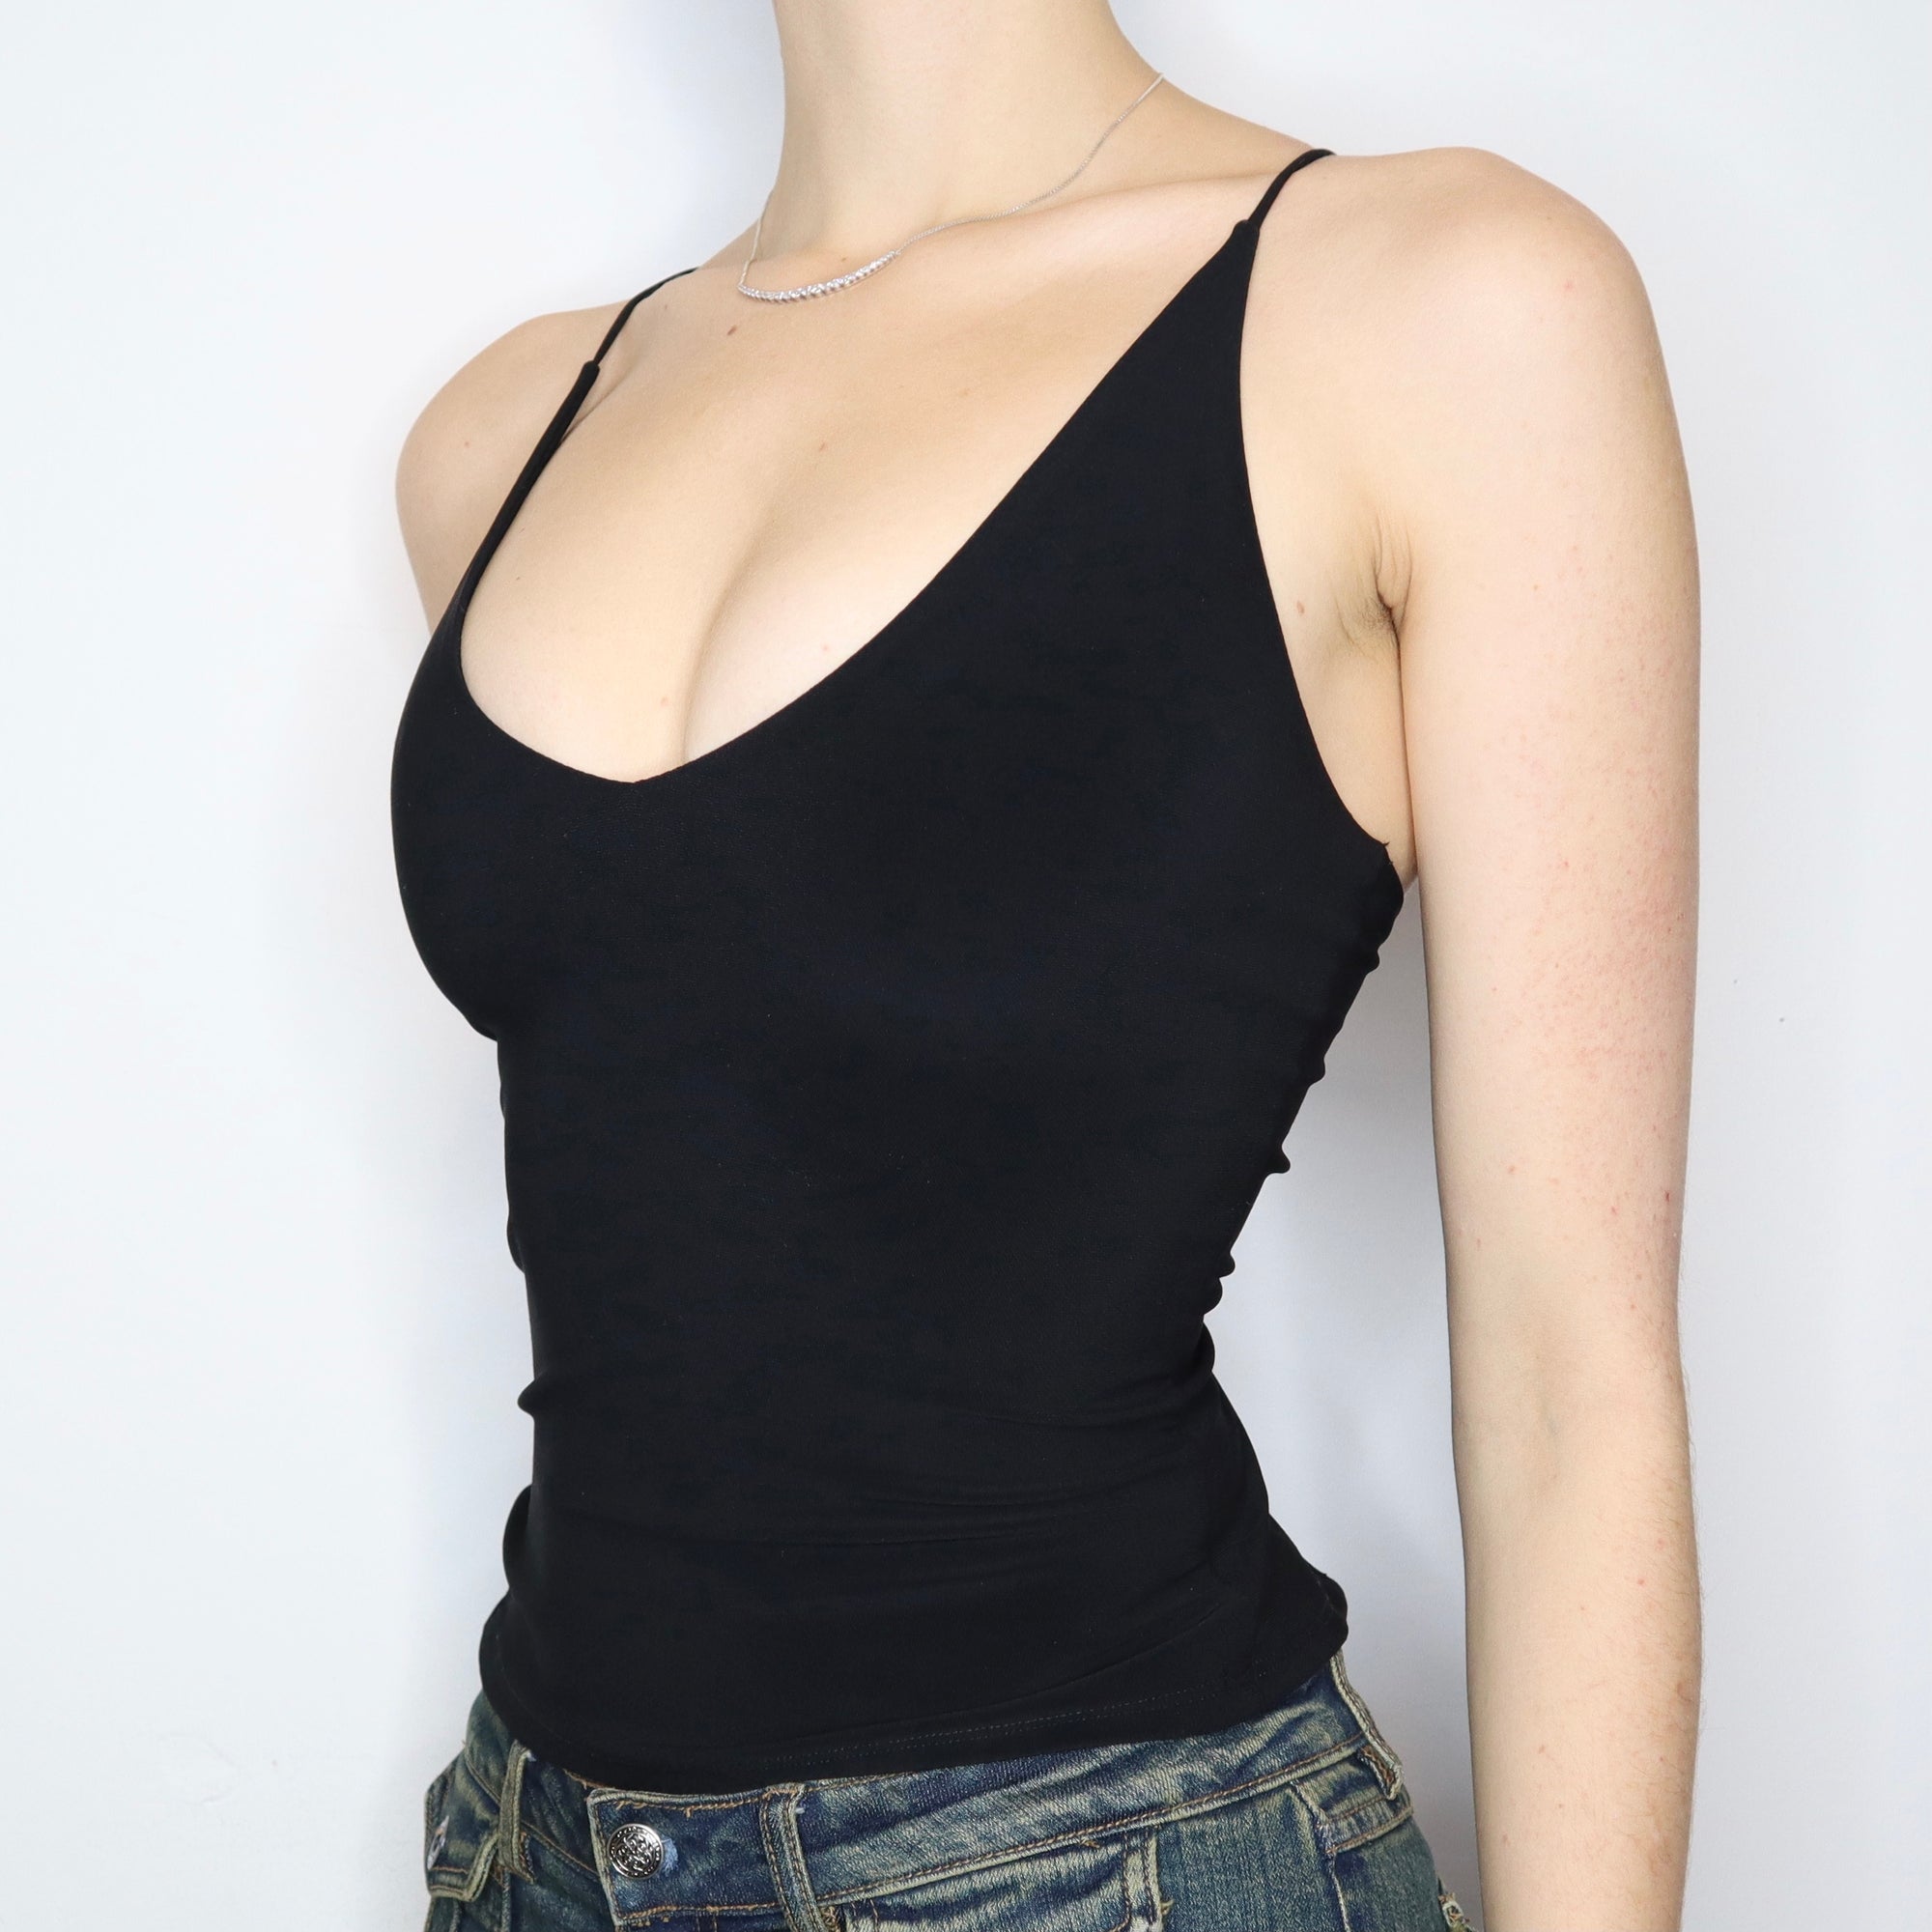 Vintage Early 2000s Black Backless Cami